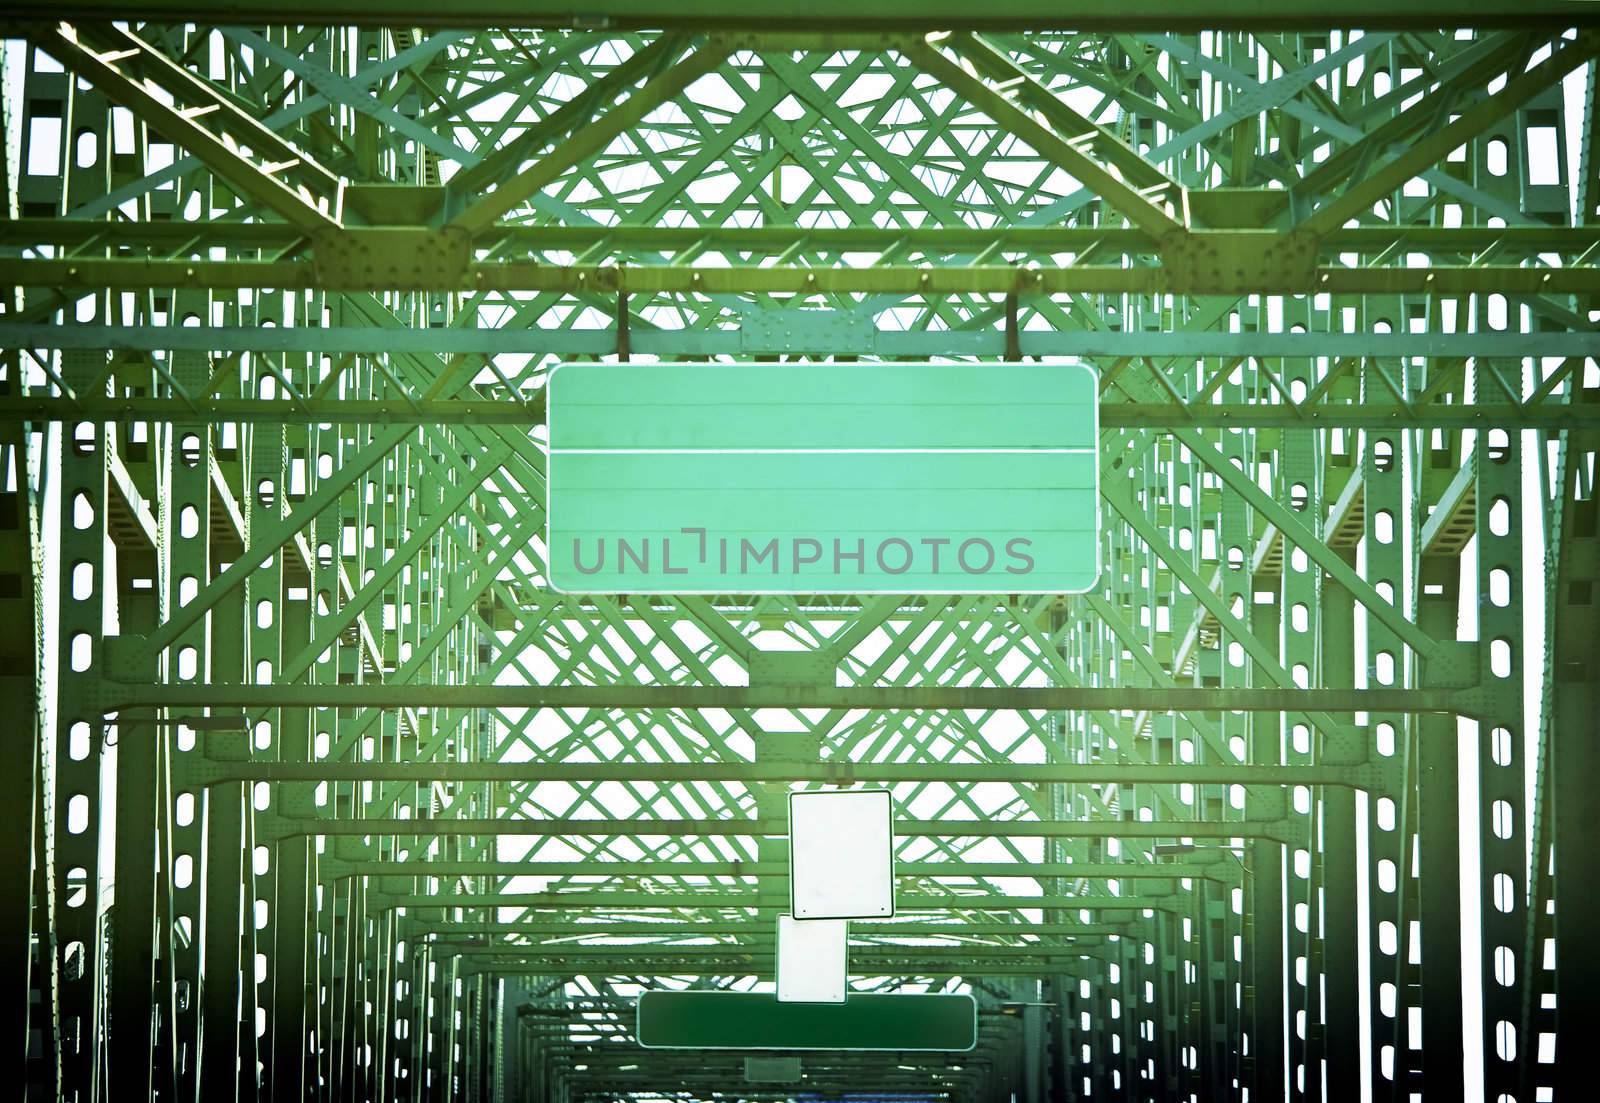 Green road sign on green bridge in abstract patterns by jarenwicklund